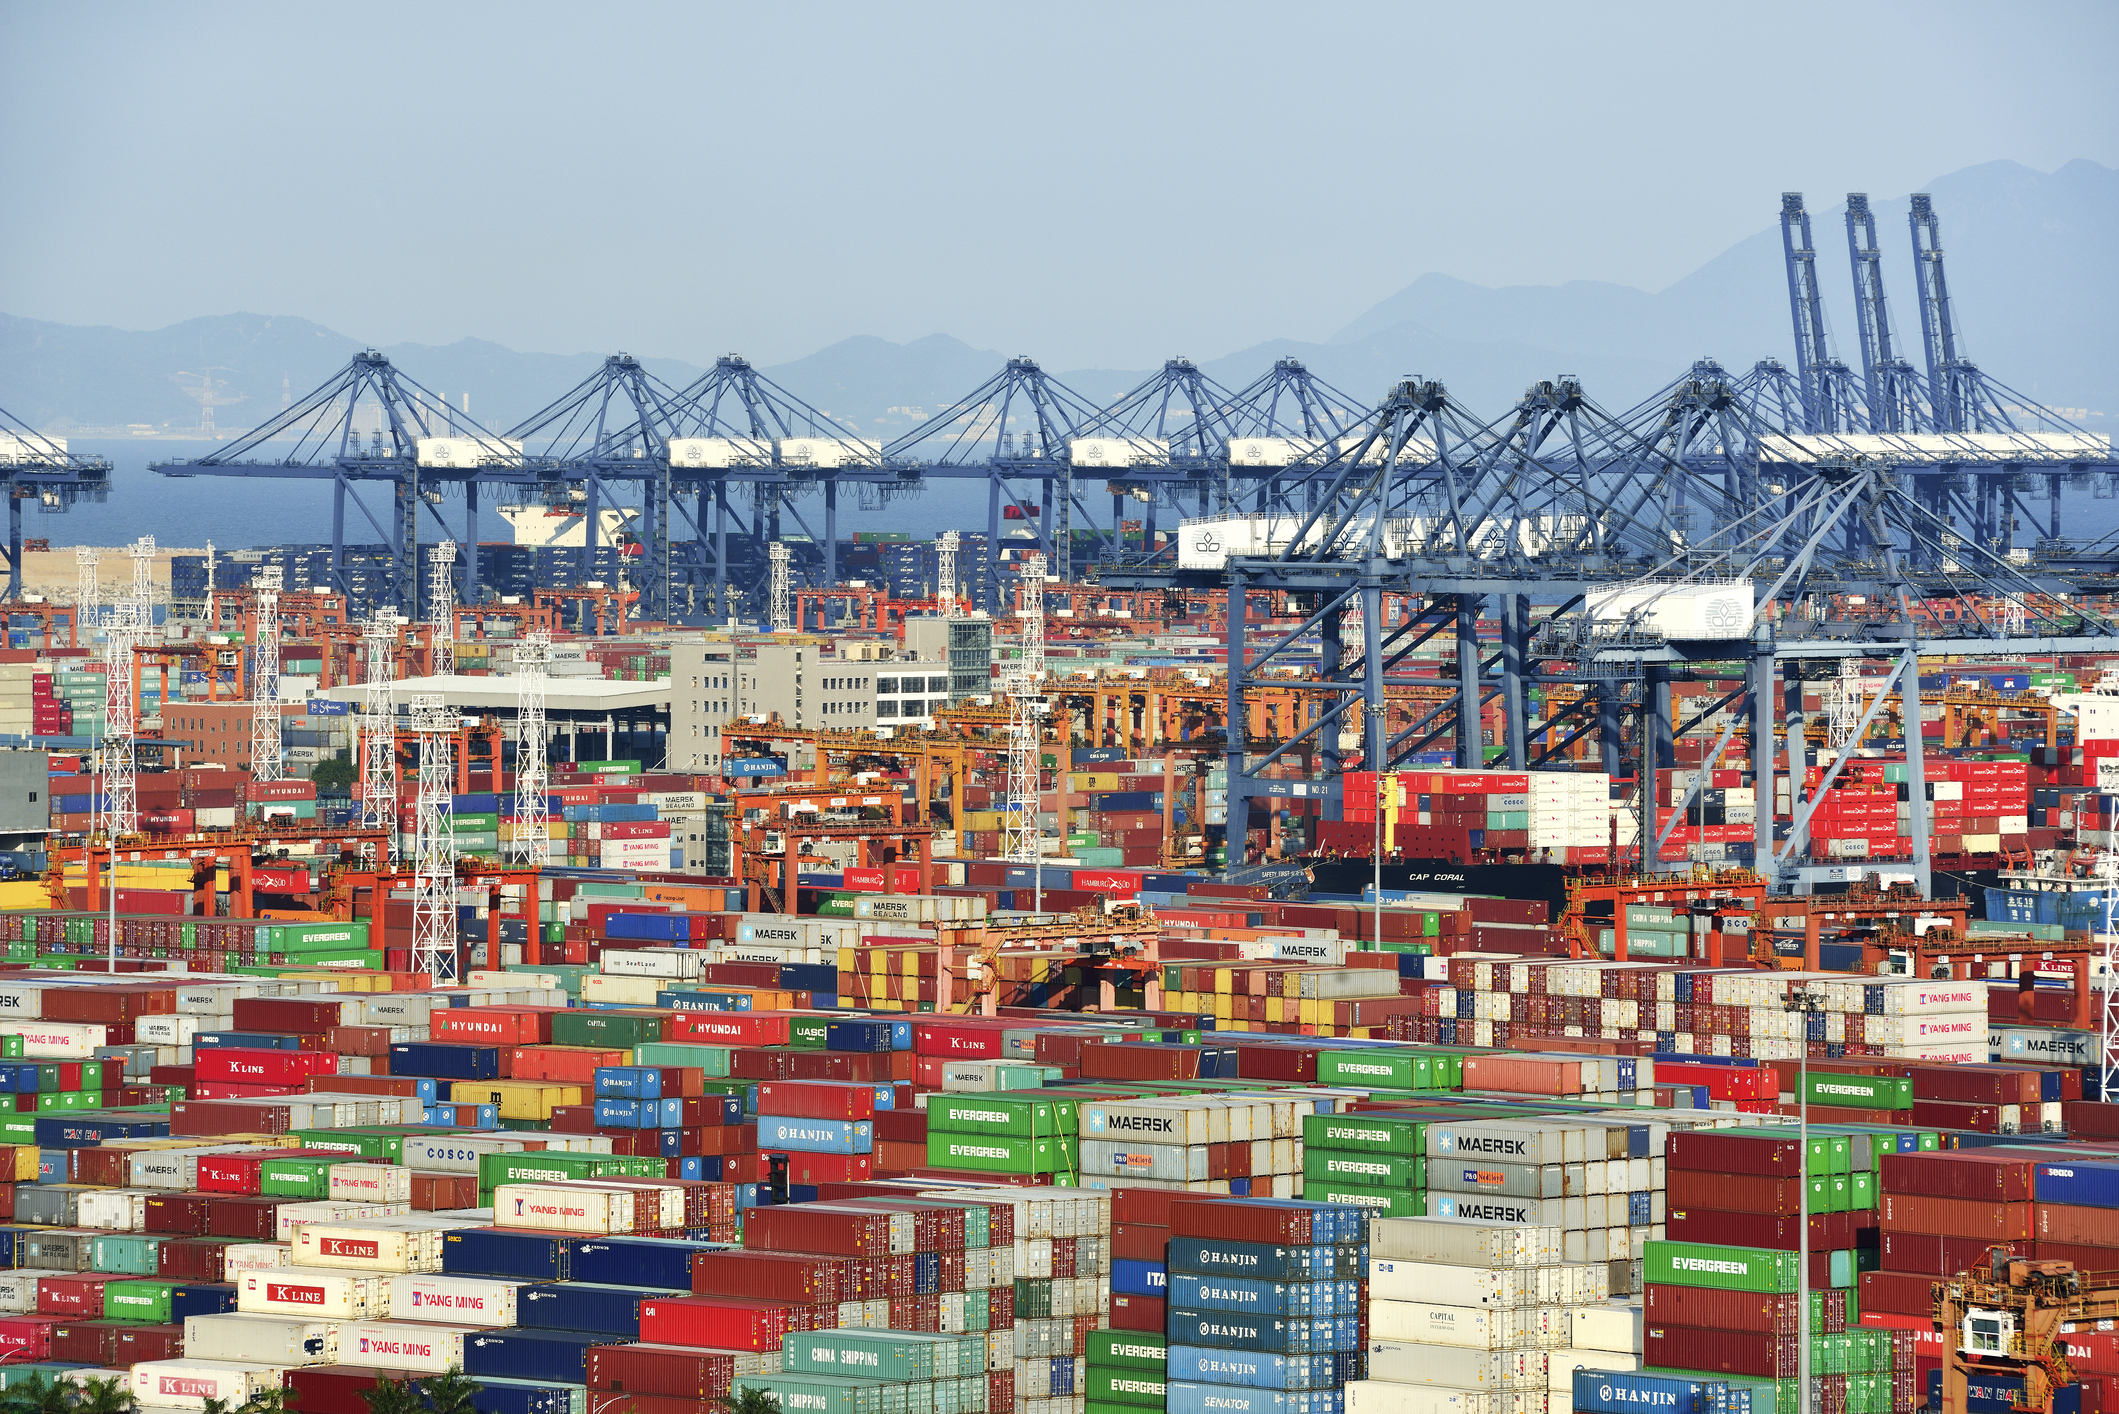 Containers and cranes in harbor, Shenzhen, China.